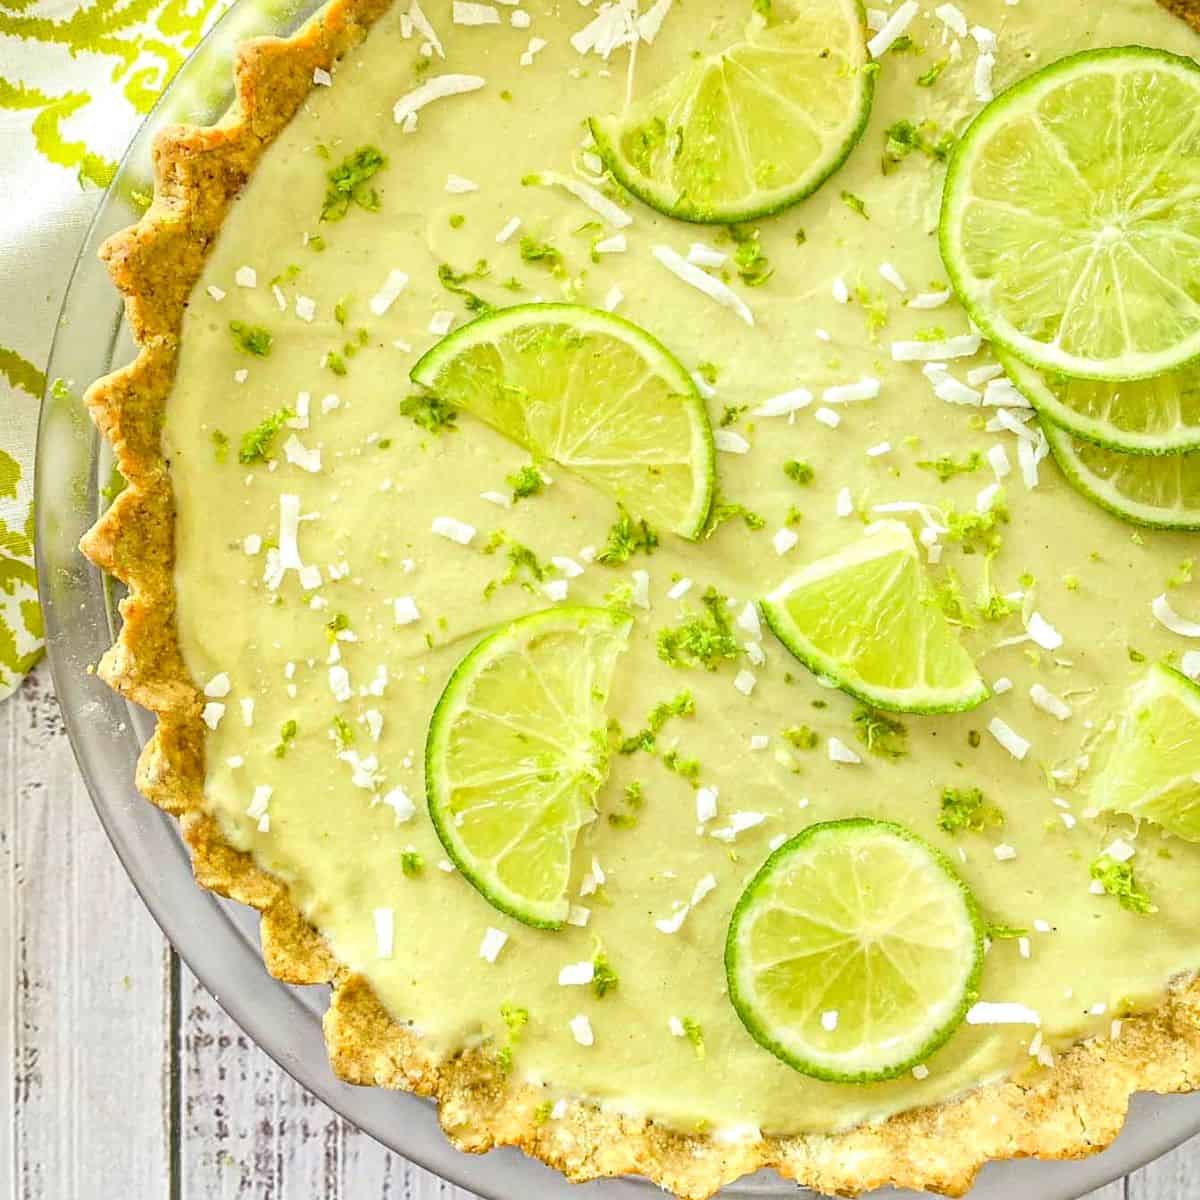 Vegan key lime pie with lime slices on top.